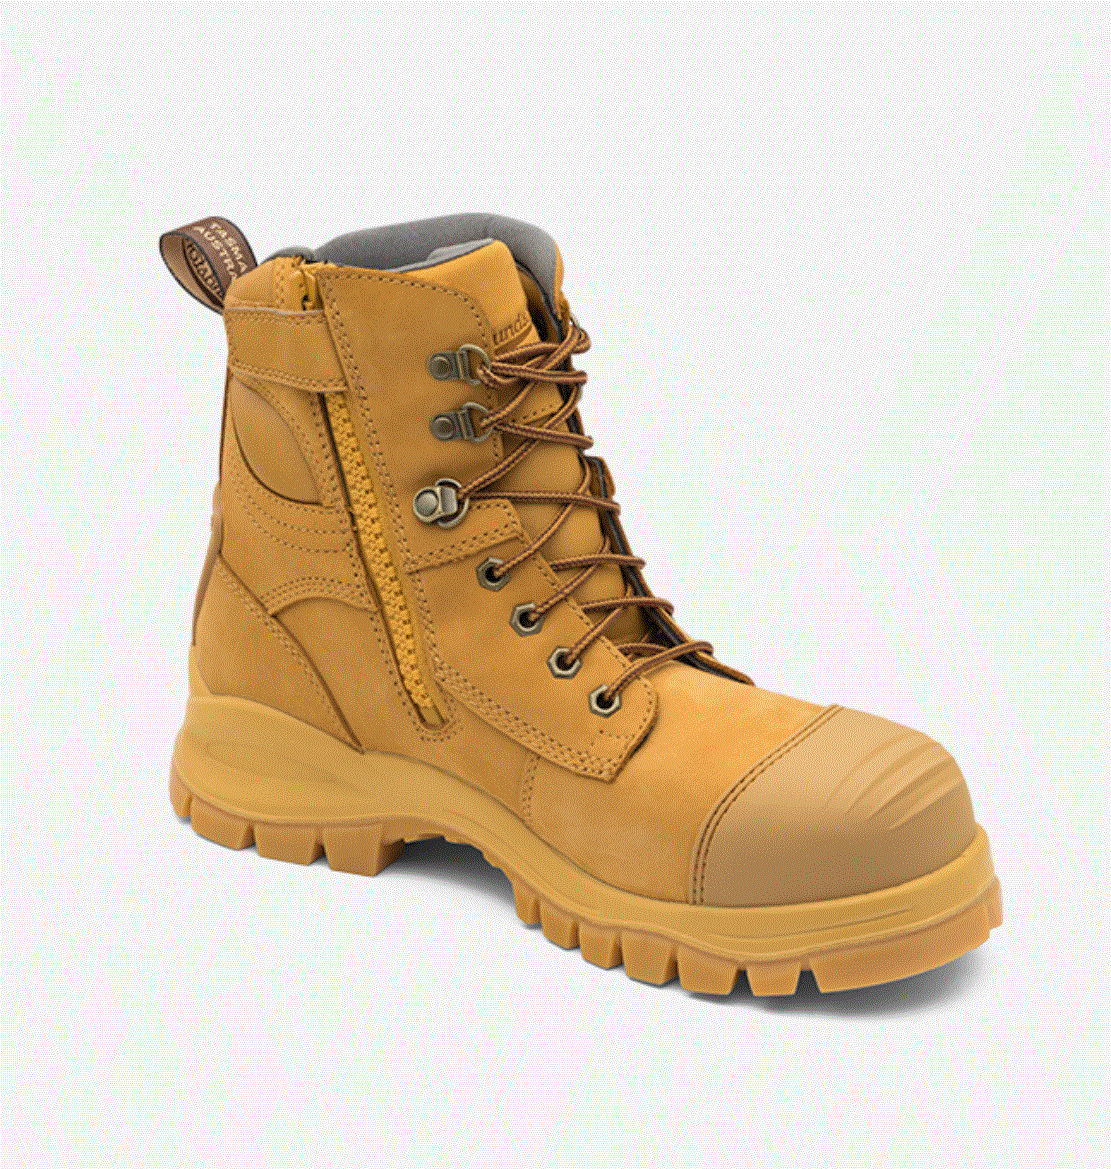 992 Blundstone Safety Ankle Zip Boot 150mm